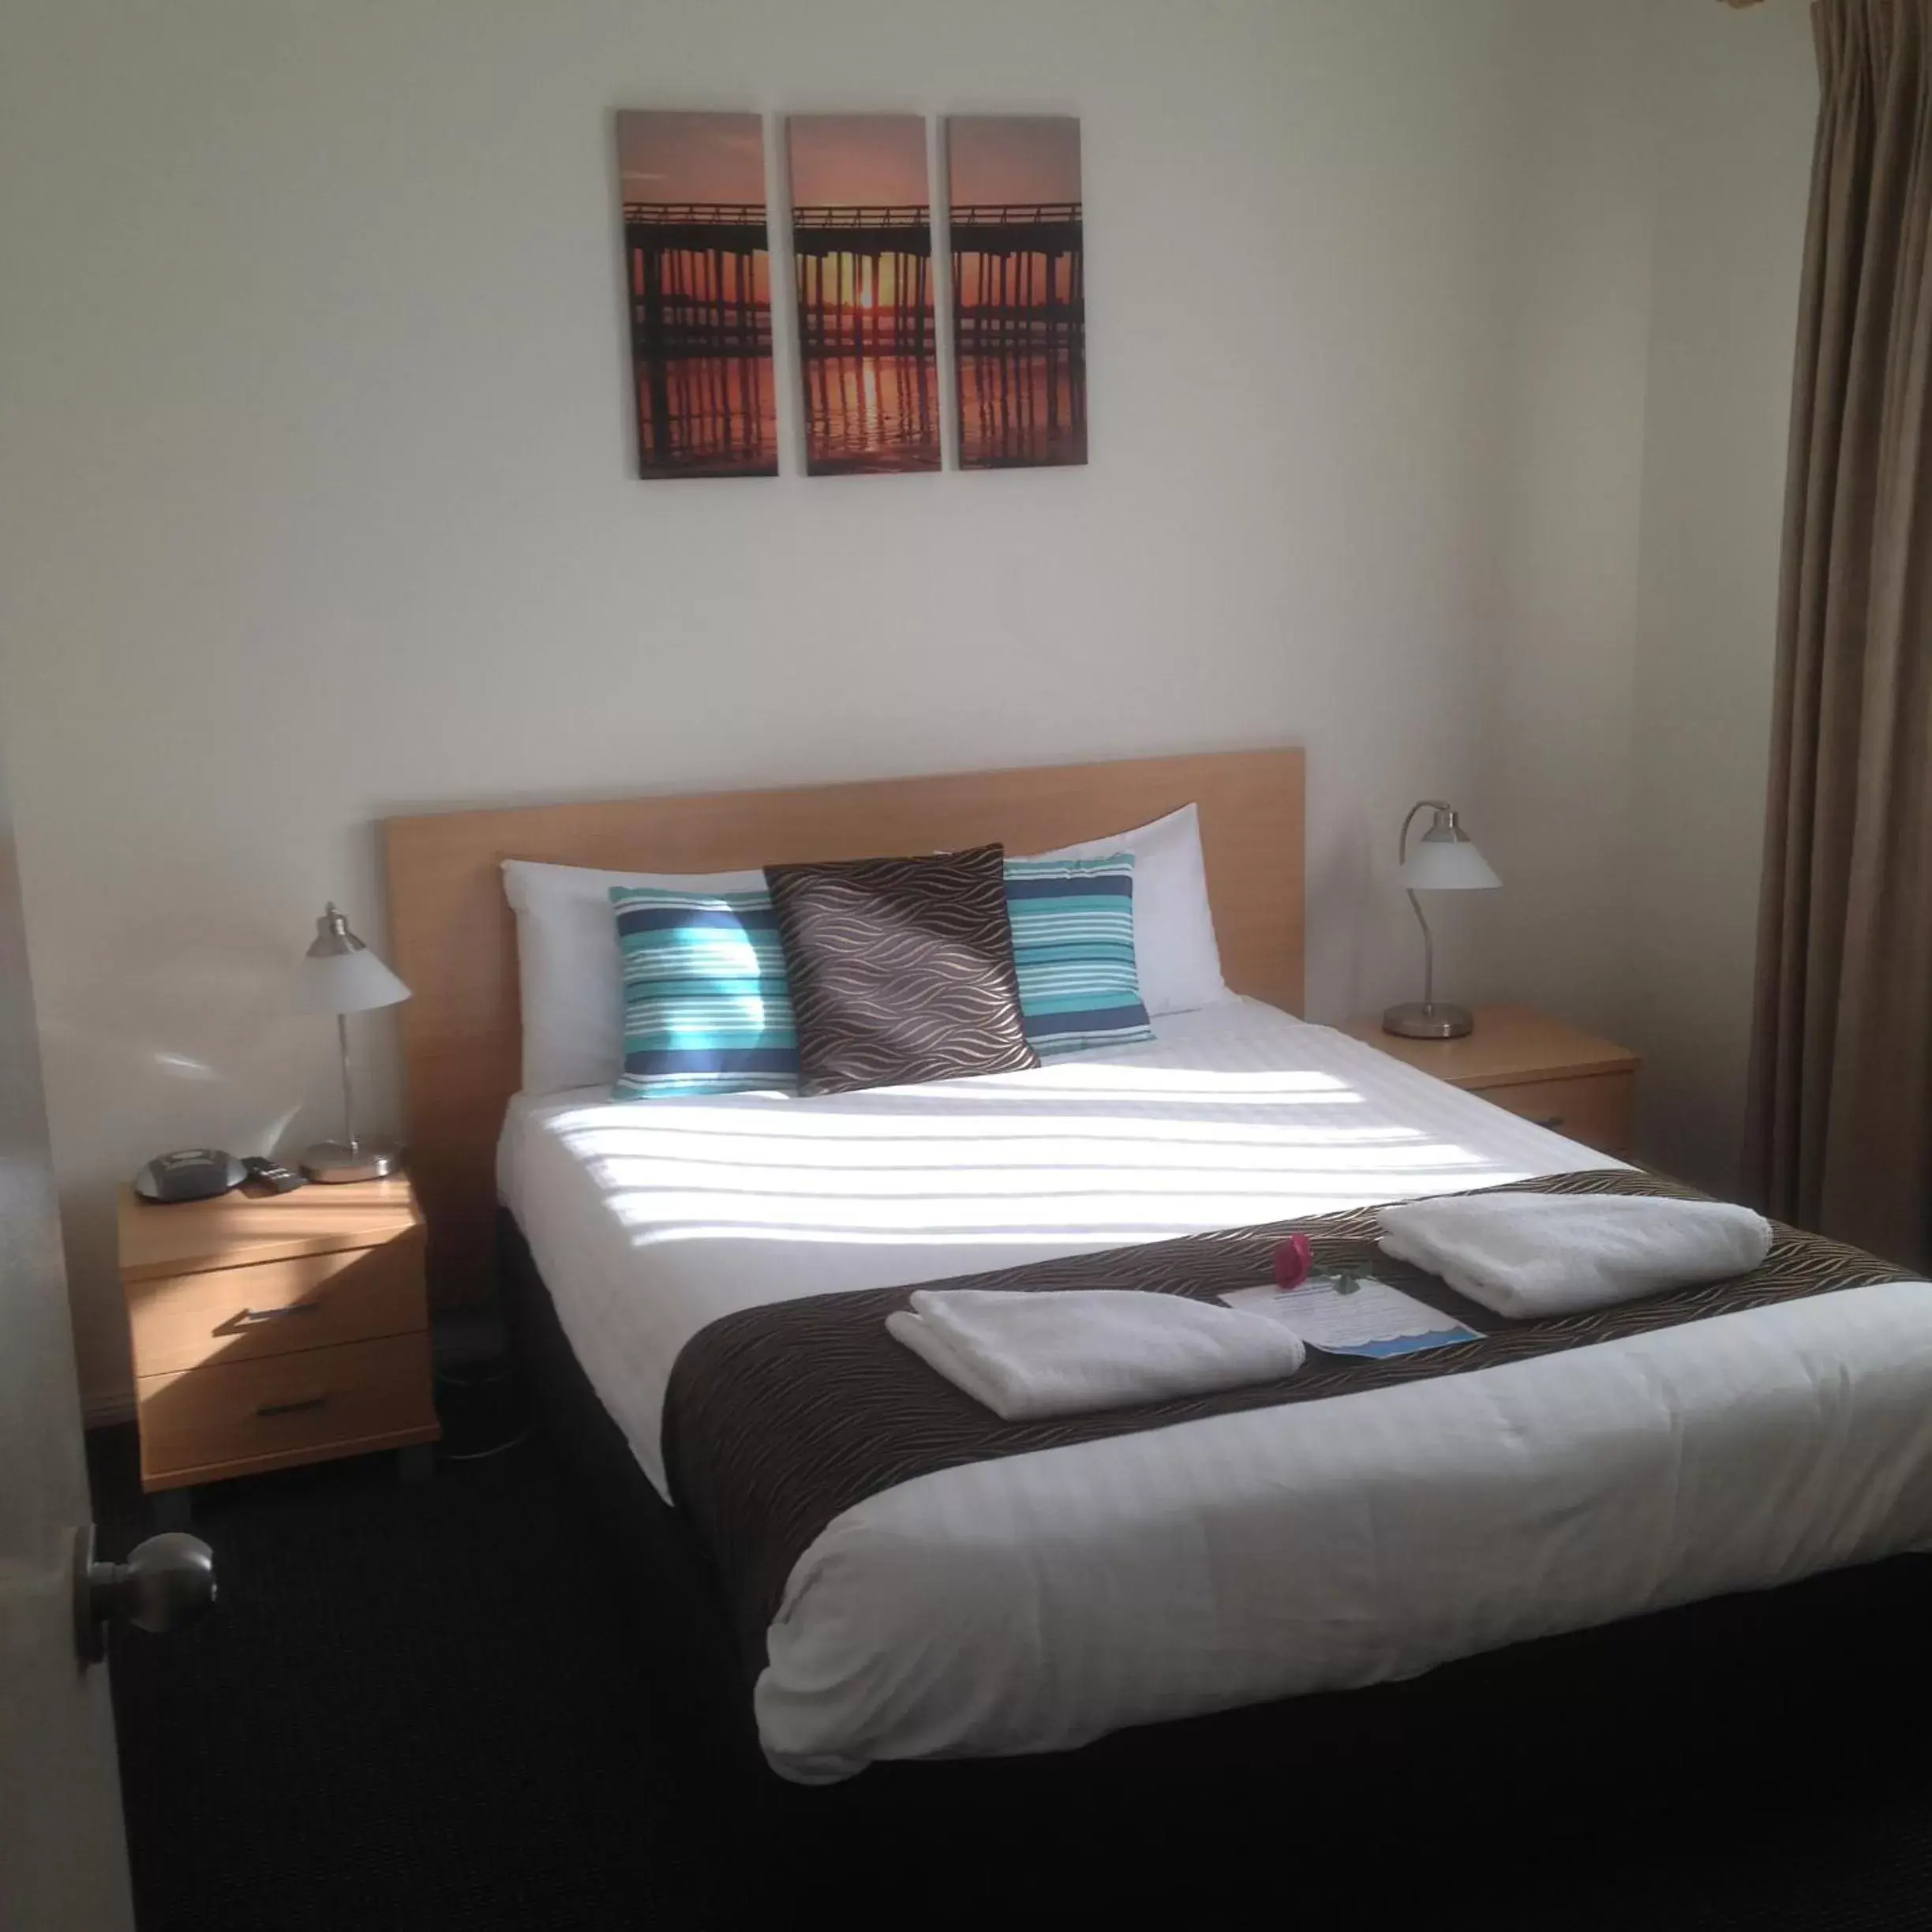 Bed, Room Photo in Beaches Serviced Apartments